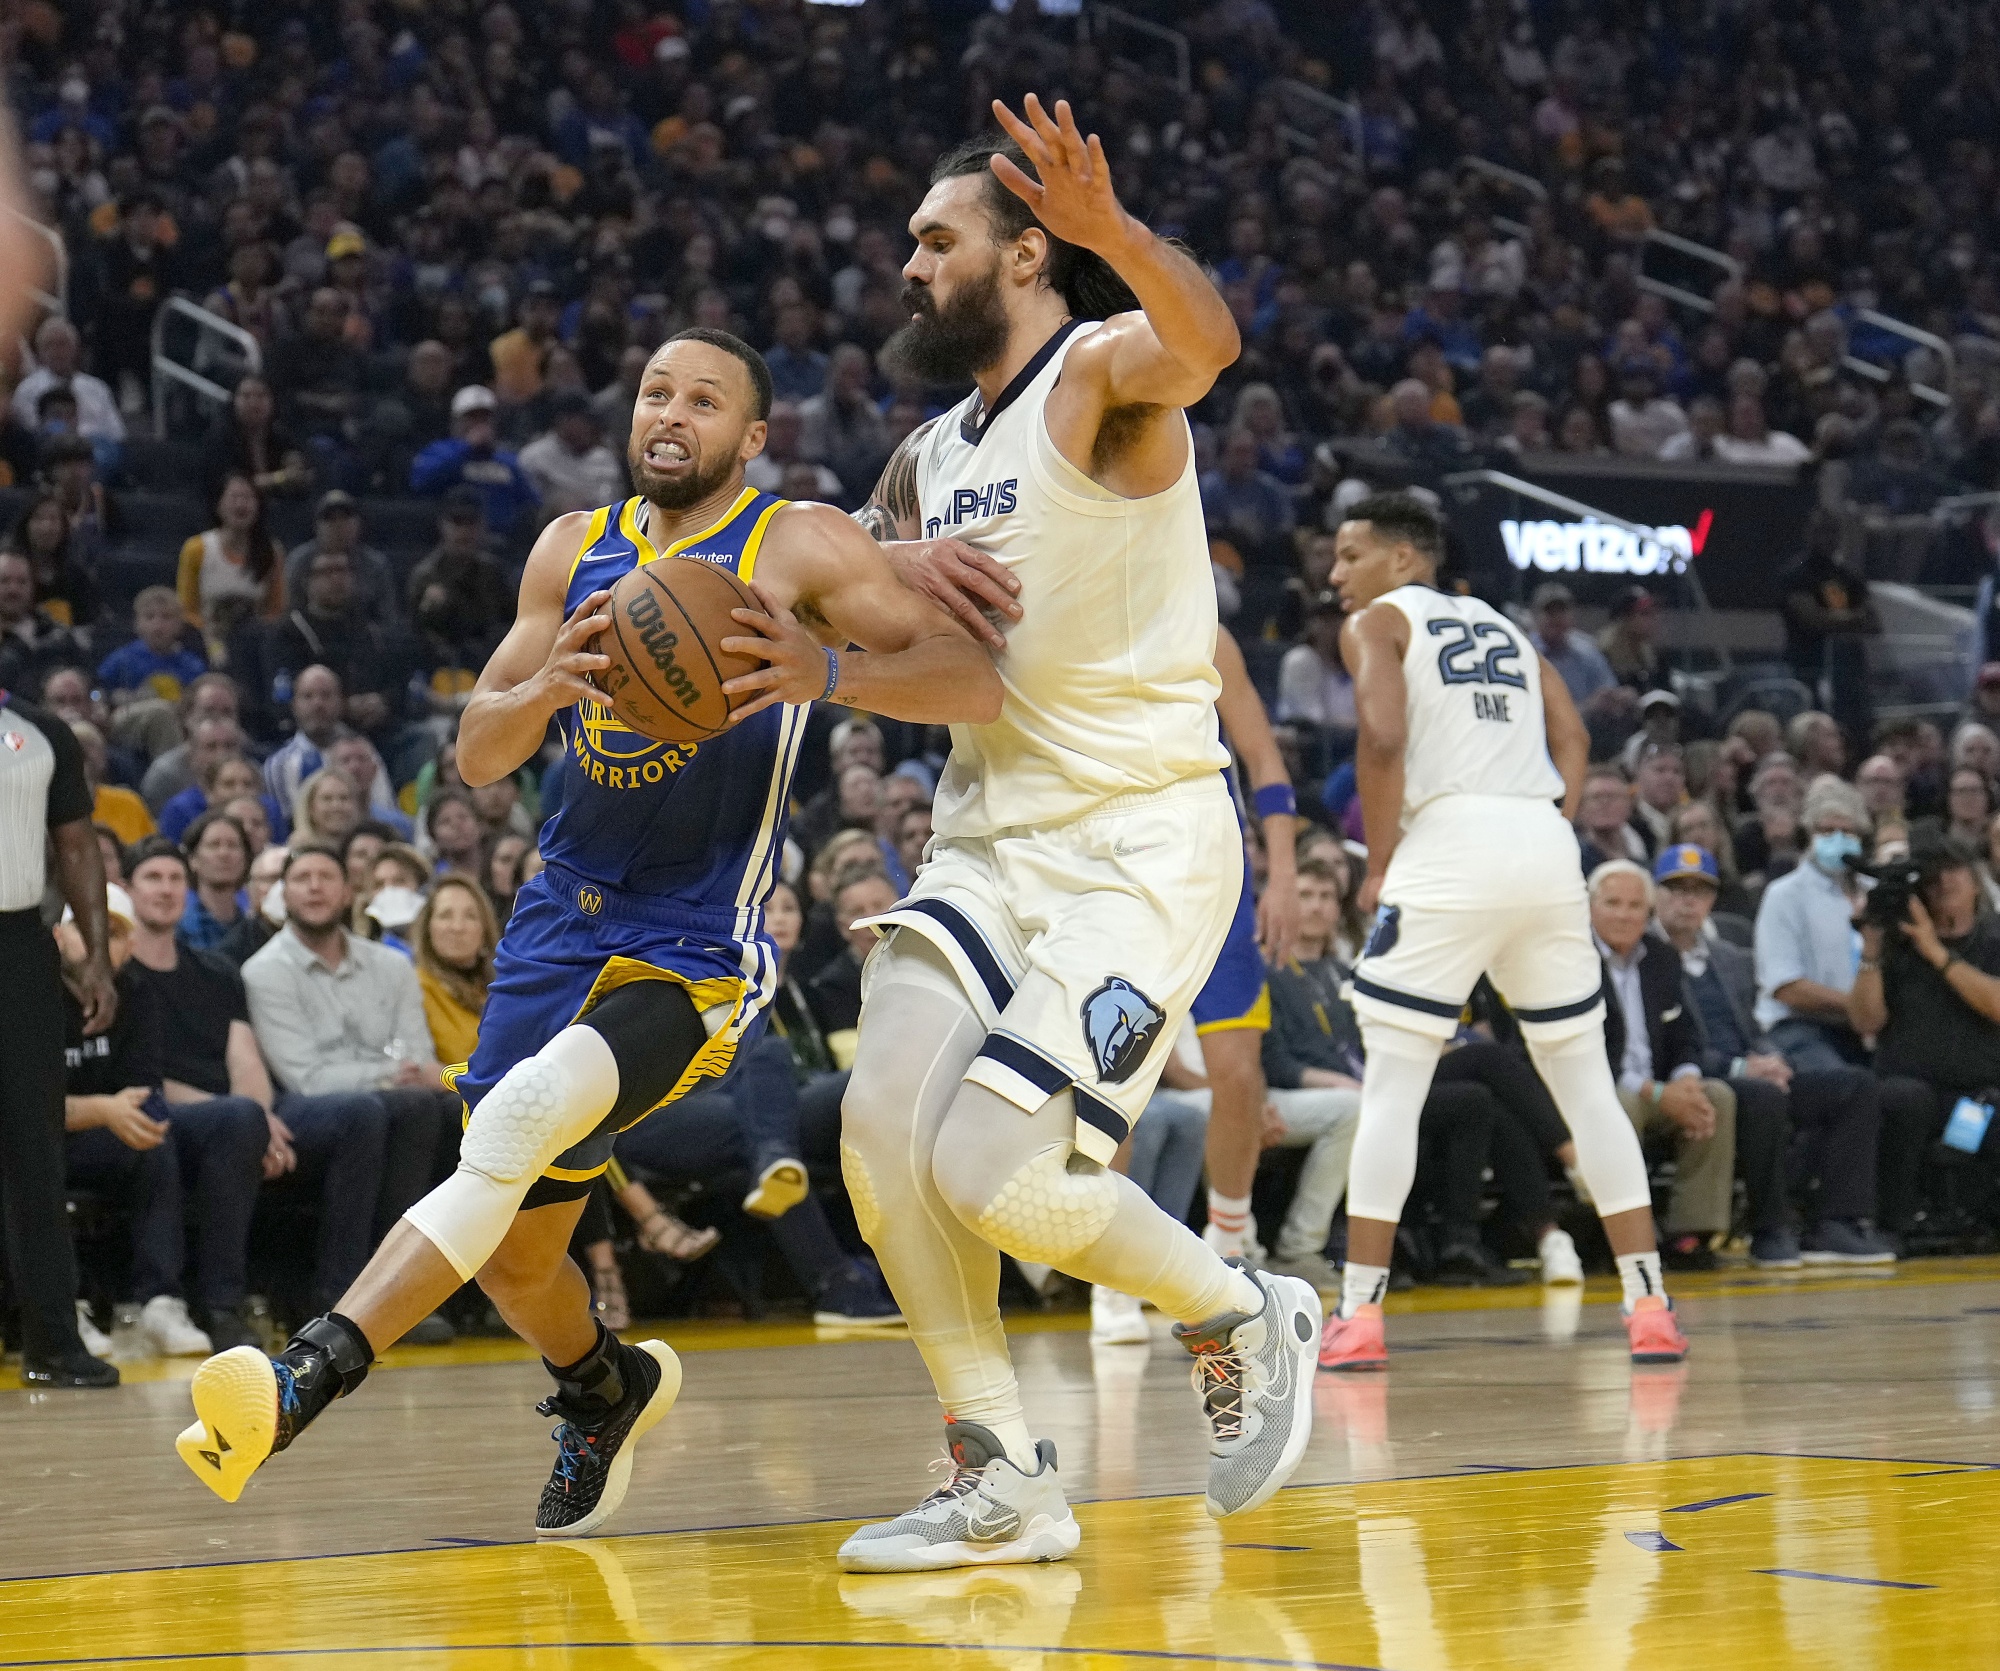 How ACL, Achilles injuries changed Klay Thompson: Differences on full  display in 2022 NBA Playoffs